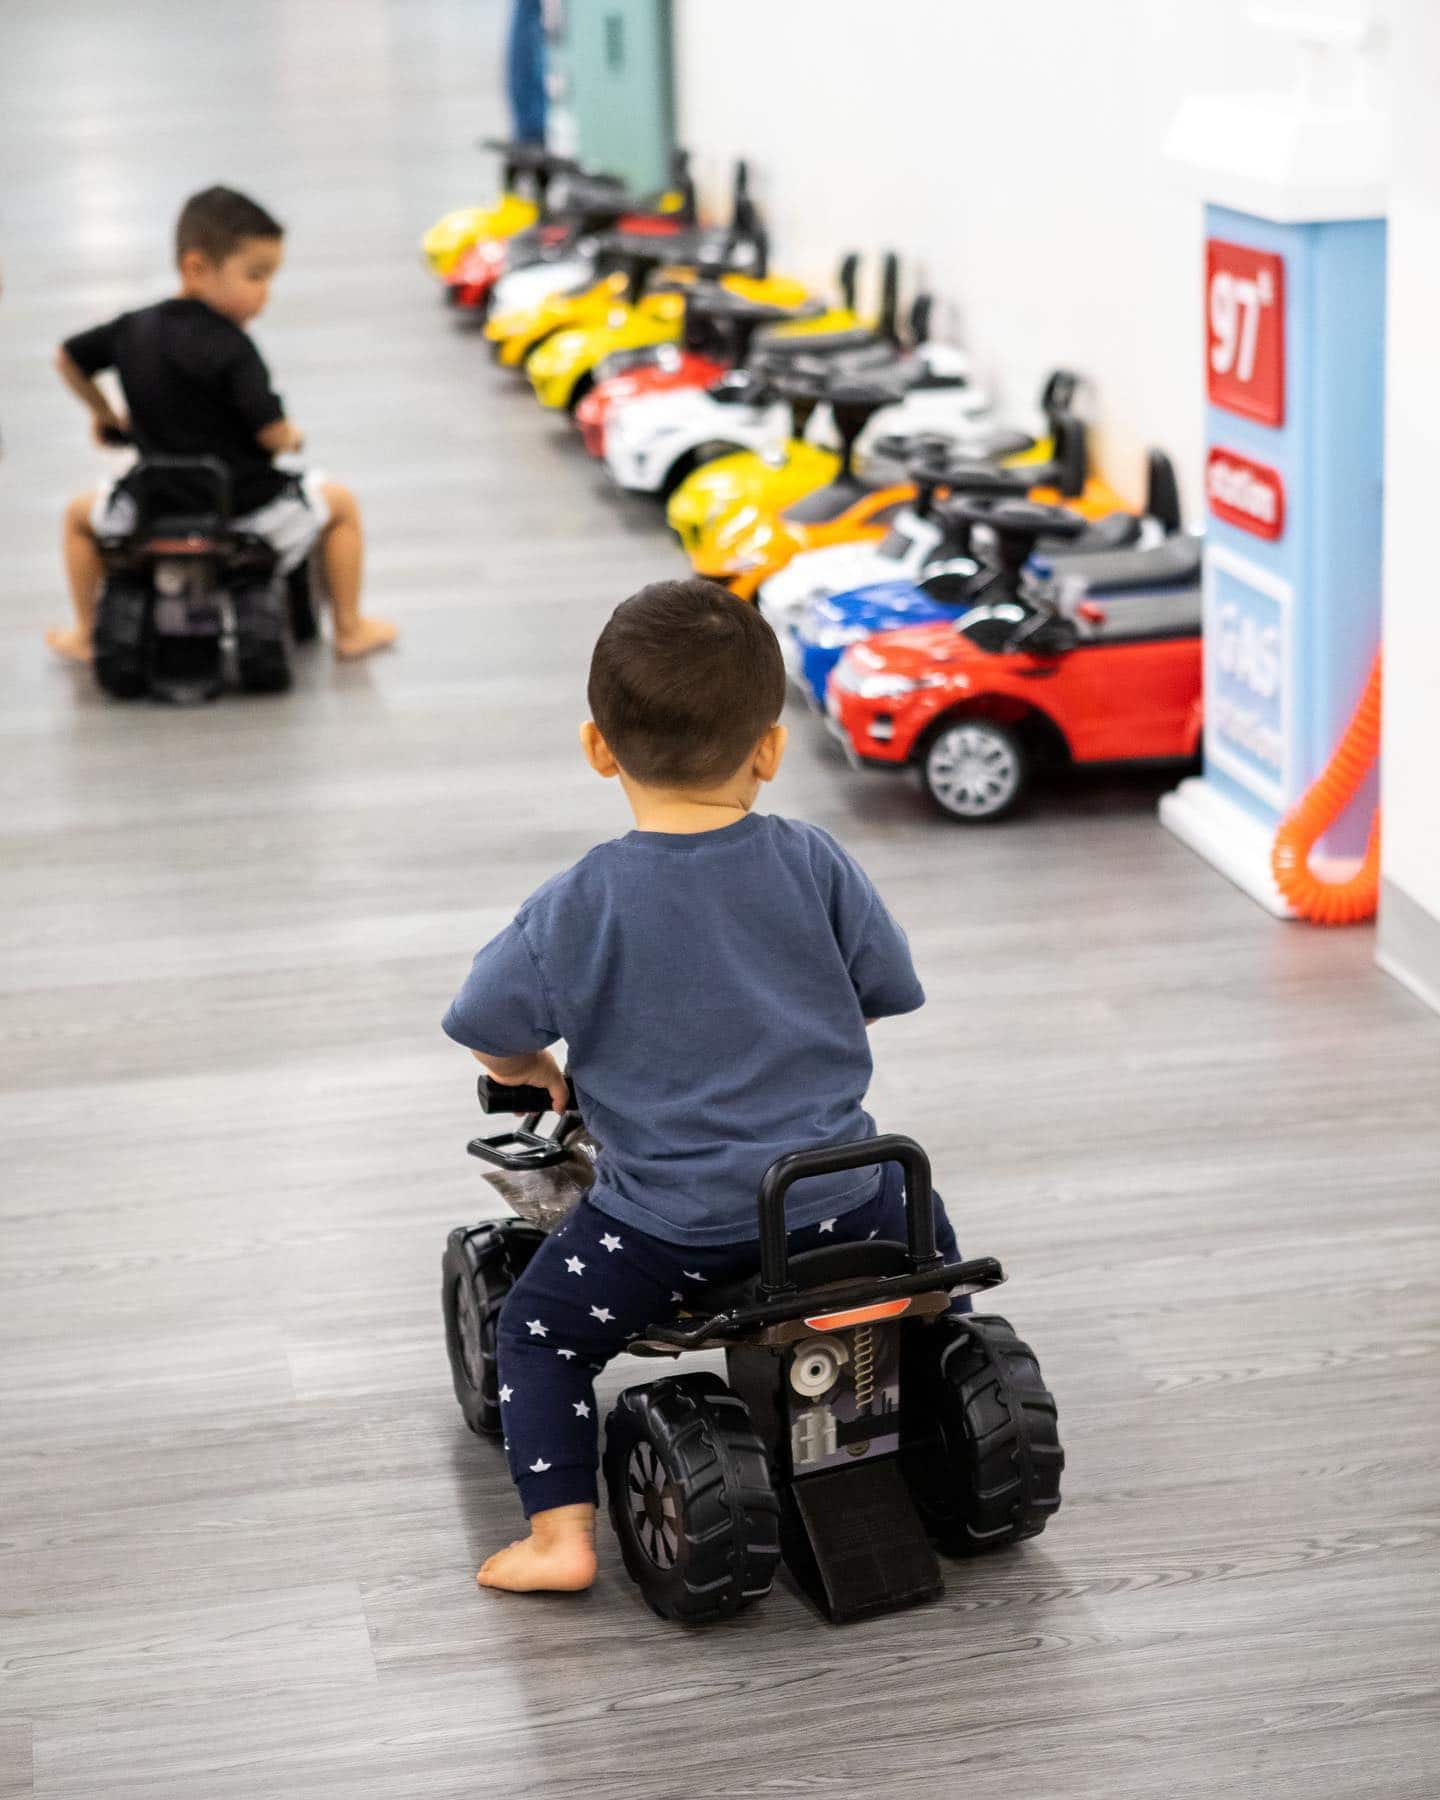 Beep, beep! Free parking for tots & their parents at Ward Centre. Reserve your time slot at the premium indoor play space @kidscityhawaii by clicking our link in bio.